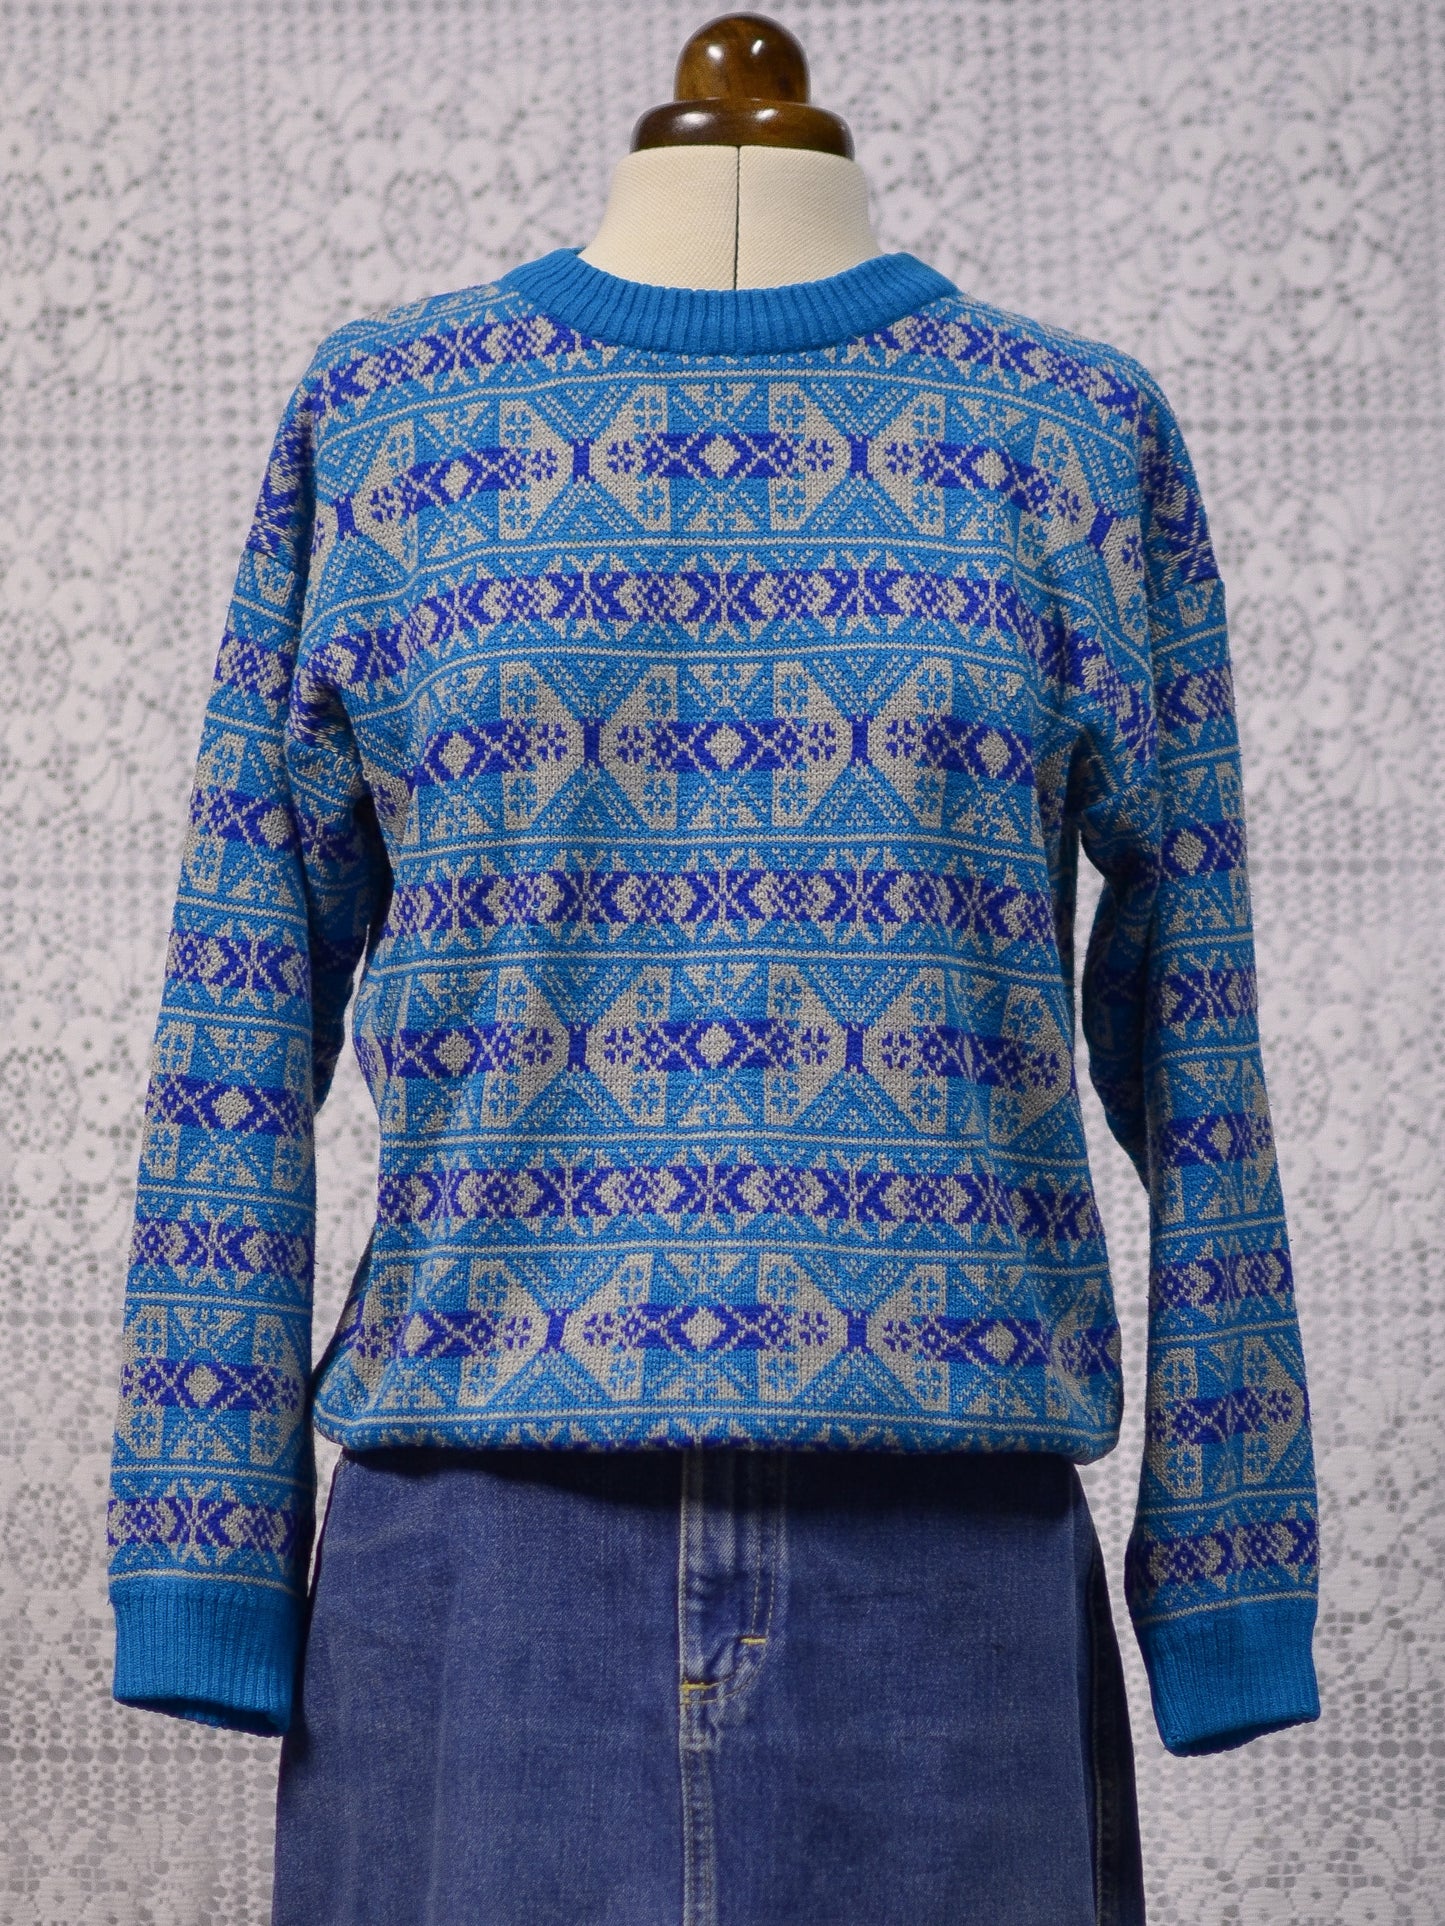 1980s blue and grey festive snowflake long sleeve jumper